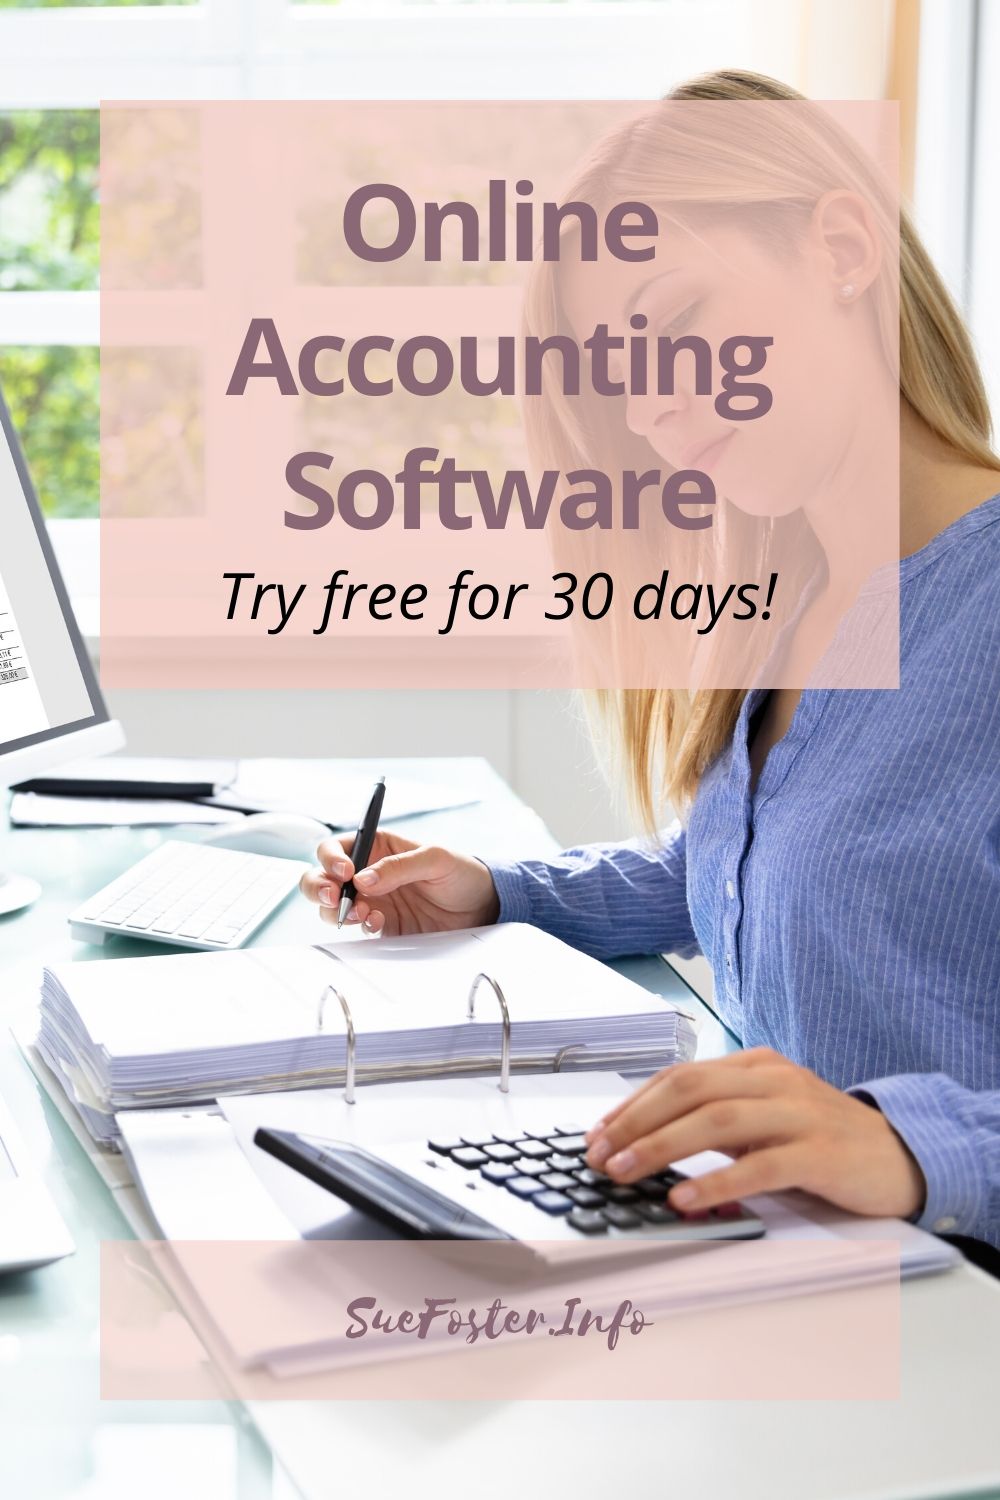 Online accounting software for small businesses. Try it free for 30 days!